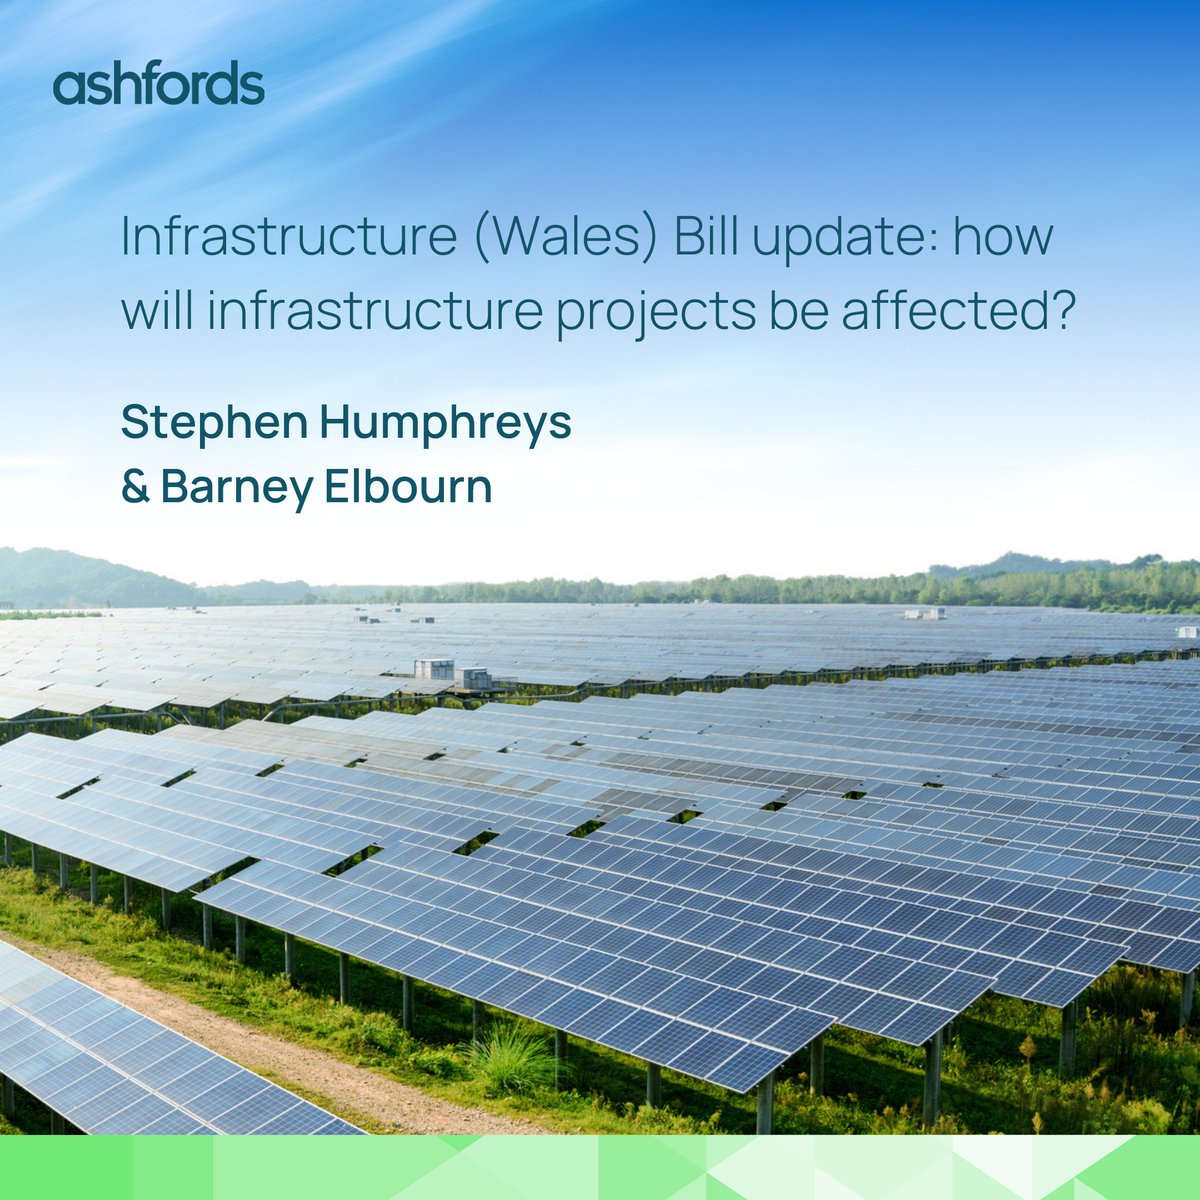 A final form of the Infrastructure (Wales) Bill, which proposes a new process for infrastructure consenting in Wales, has been published. It is expected that it will proceed to Royal Assent. Learn more about what is changing:  ashfords.co.uk/insights/artic…

#WelshLaw #PlanningLaw